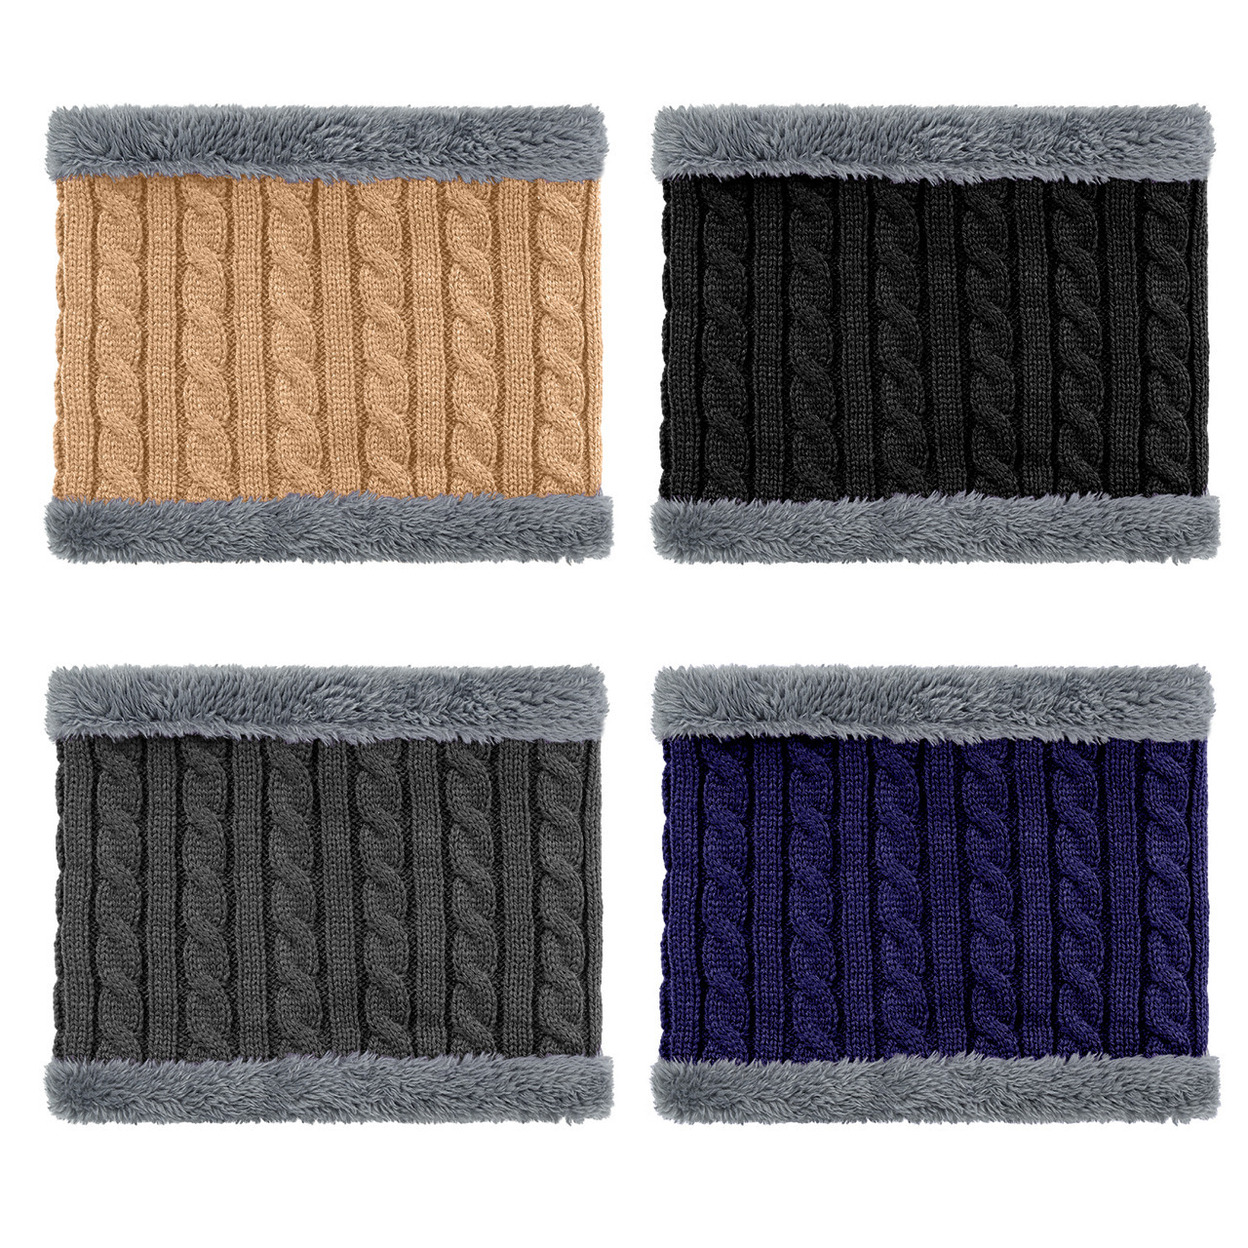 3-Pack: Winter Scarf Cold Weather Cable Knit Neck Warmer - Black,Navy,Brown